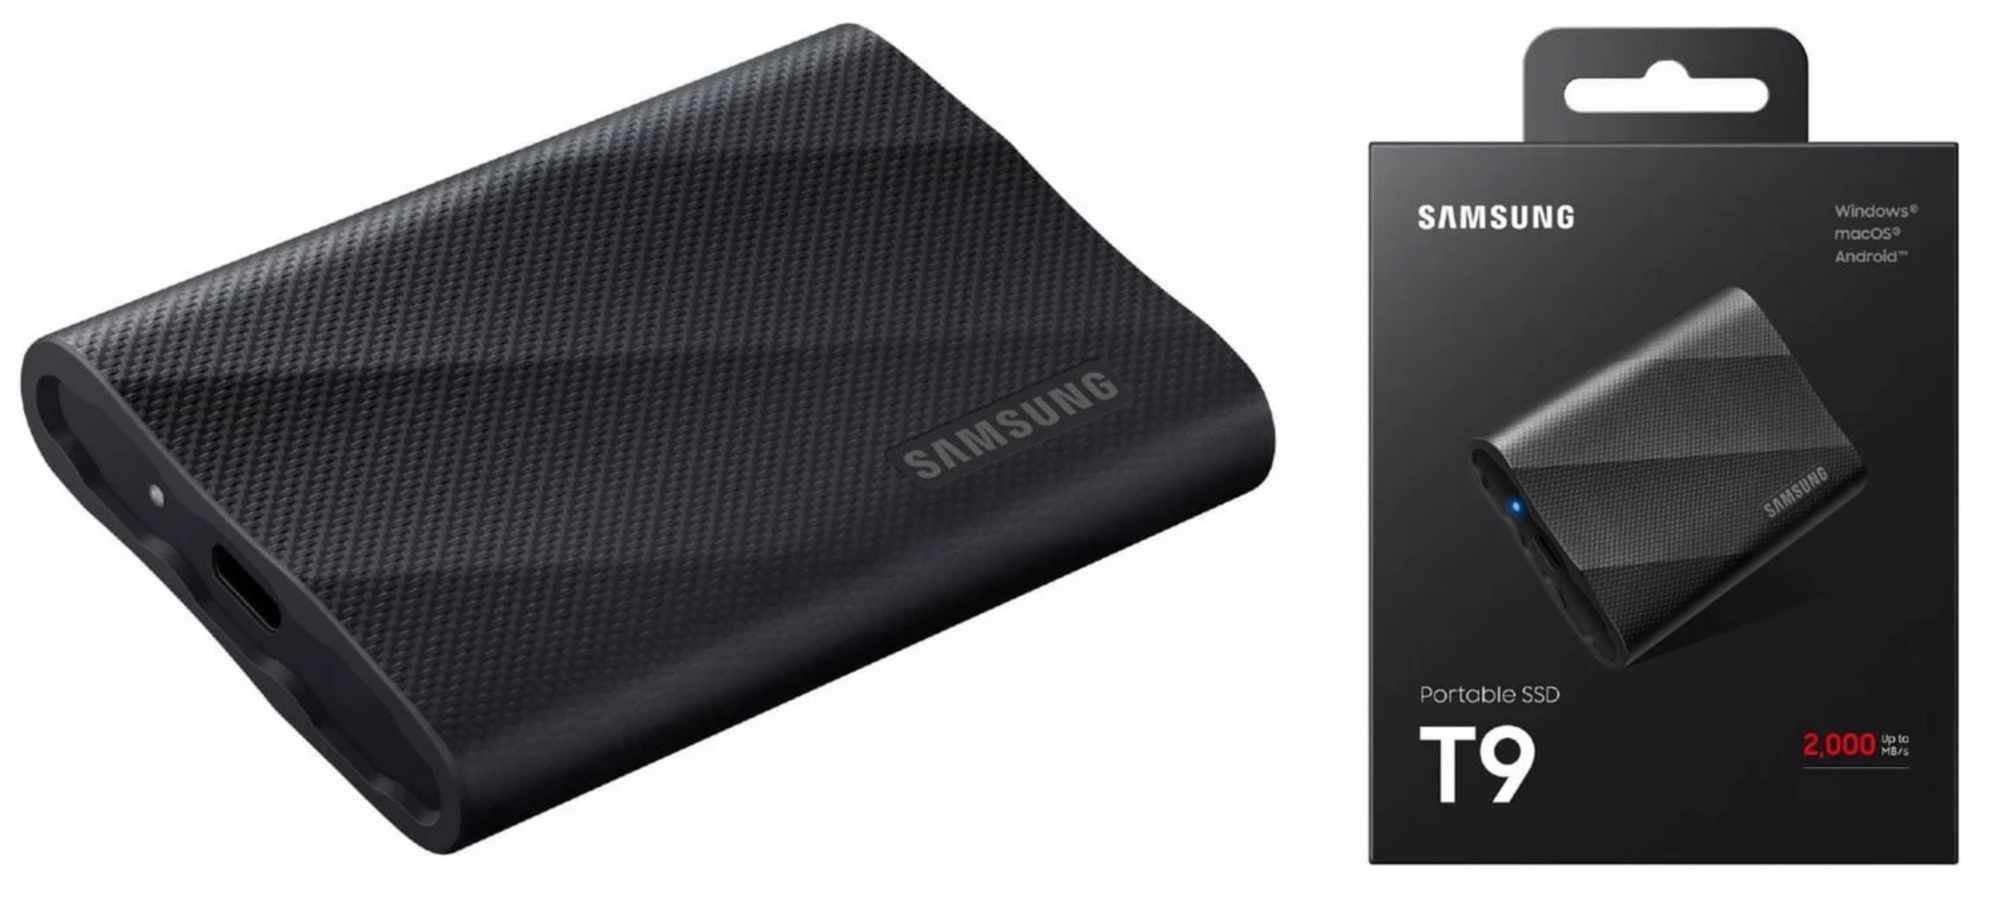 Samsung Portable SSD T9 | Page 2 | MacRumors Forums